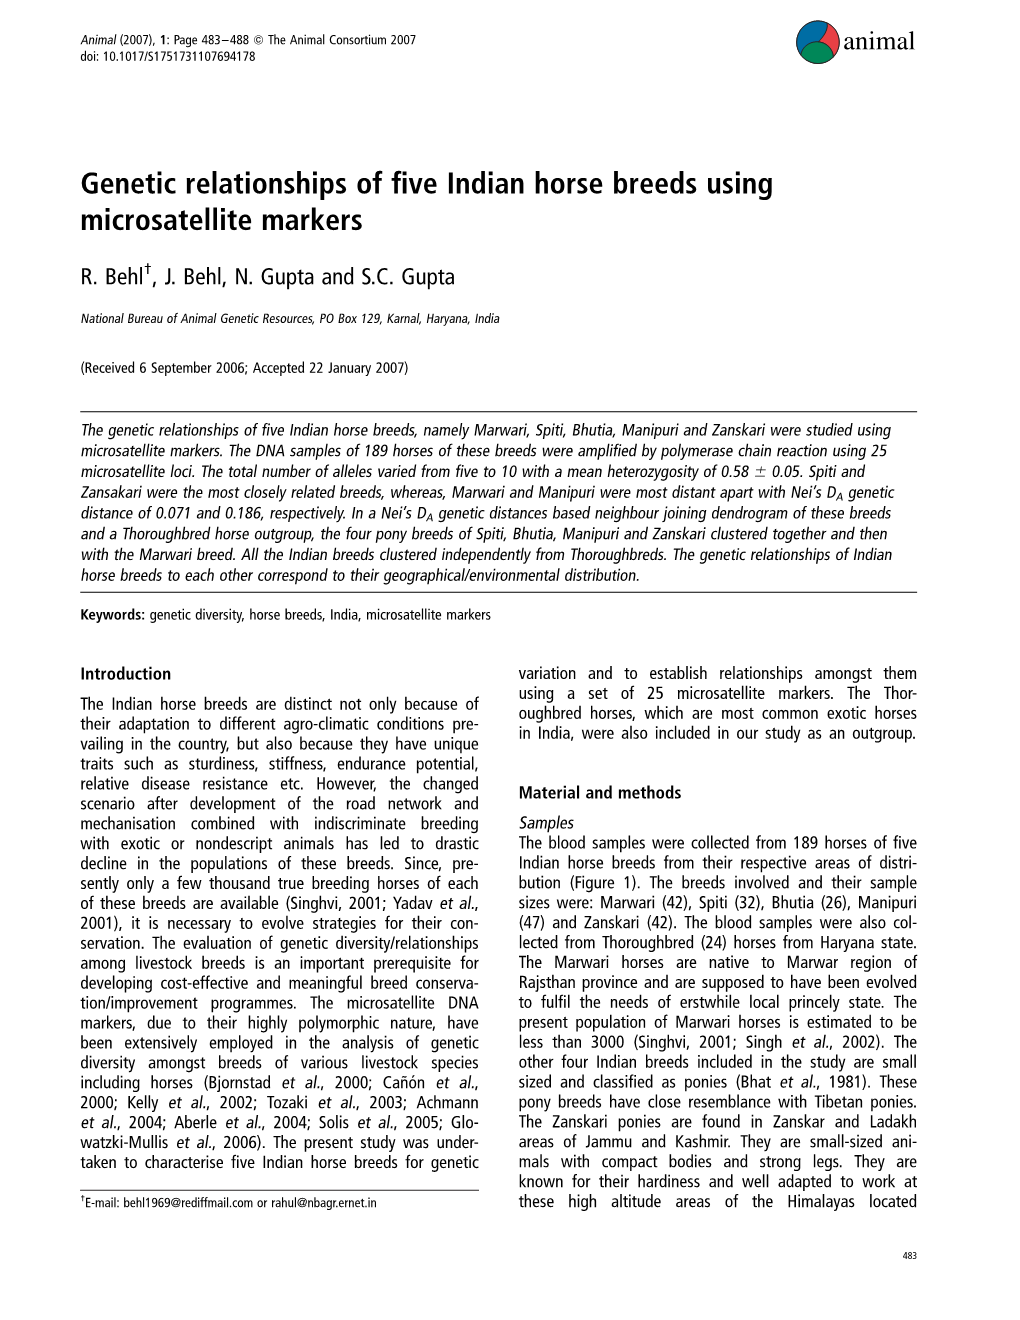 Genetic Relationships of Five Indian Horse Breeds Using Microsatellite